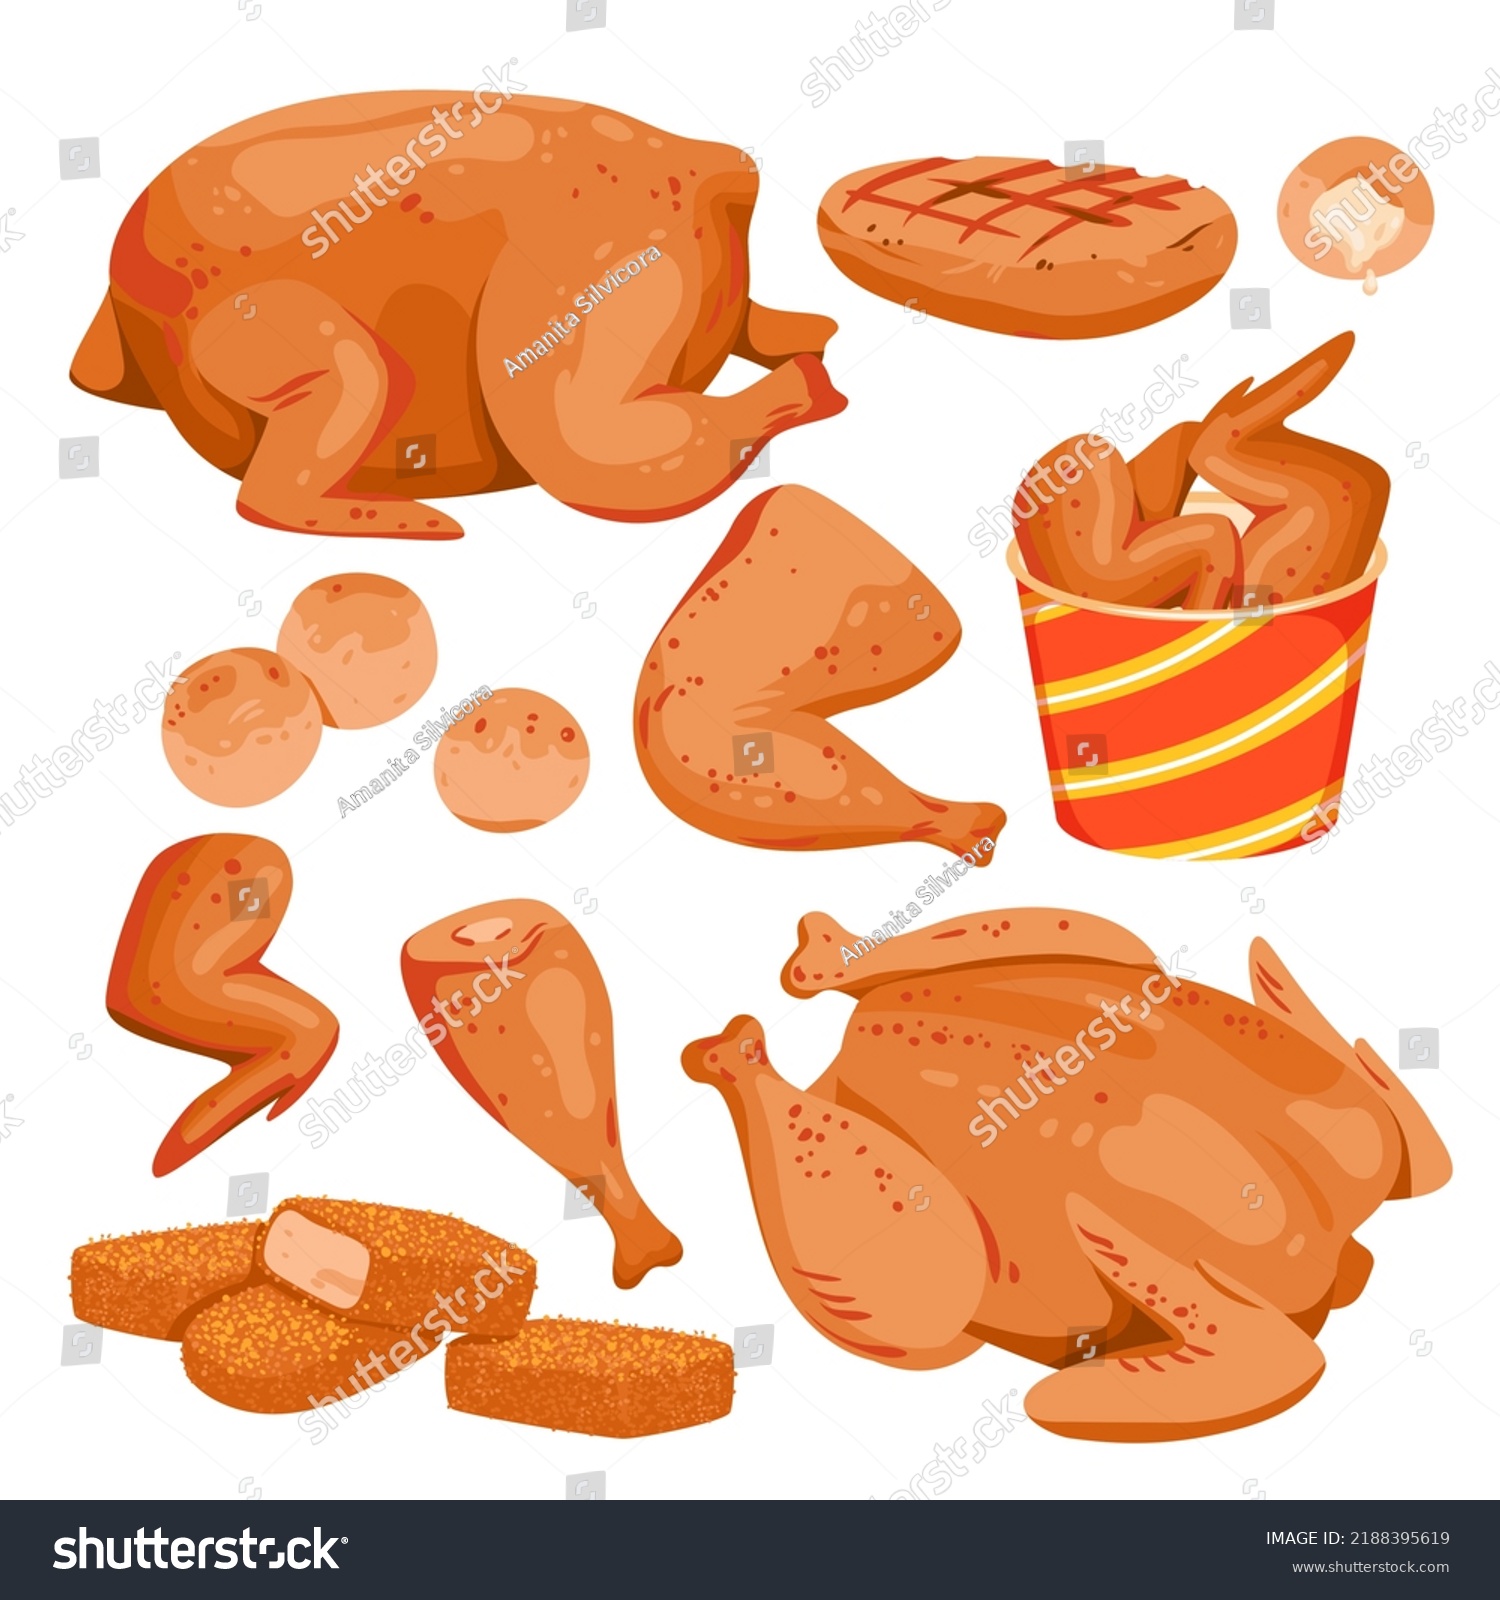 SVG of Cartoon isolated hot roasted fillet from breasts, tasty spicy drumsticks and wings in box, nuggets and grilled chicken cutlets for poultry menu collection. Fried chicken set vector illustration svg